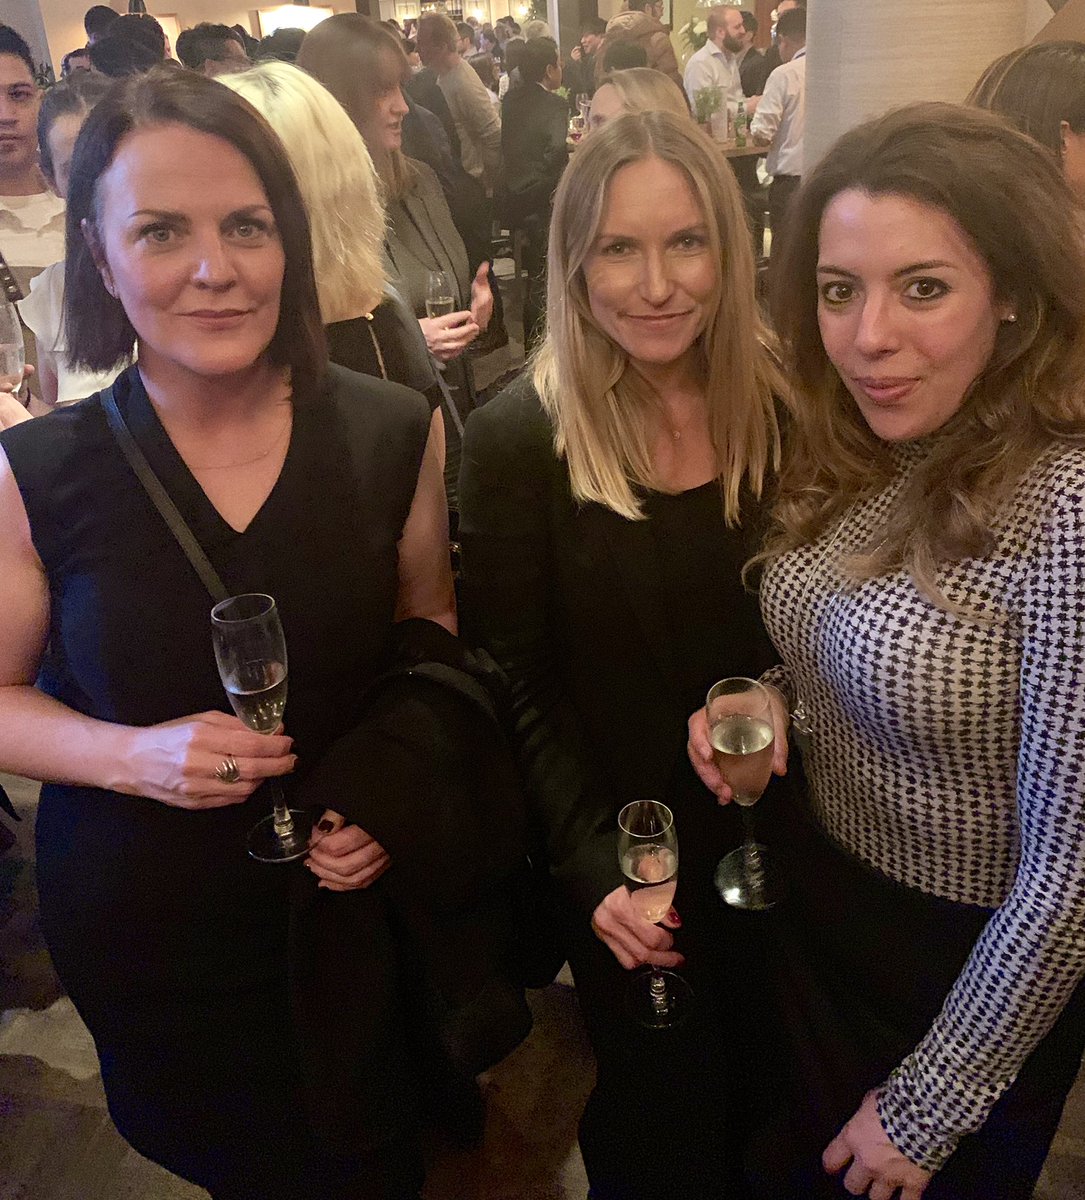 Huge thanks to all those who attended our Meet the Committee drinks. Such a wonderful evening catching up with everyone and meeting new members! @FemFraudForum 
.
#female #fraud #networking #meetthecommittee #thehappenstance